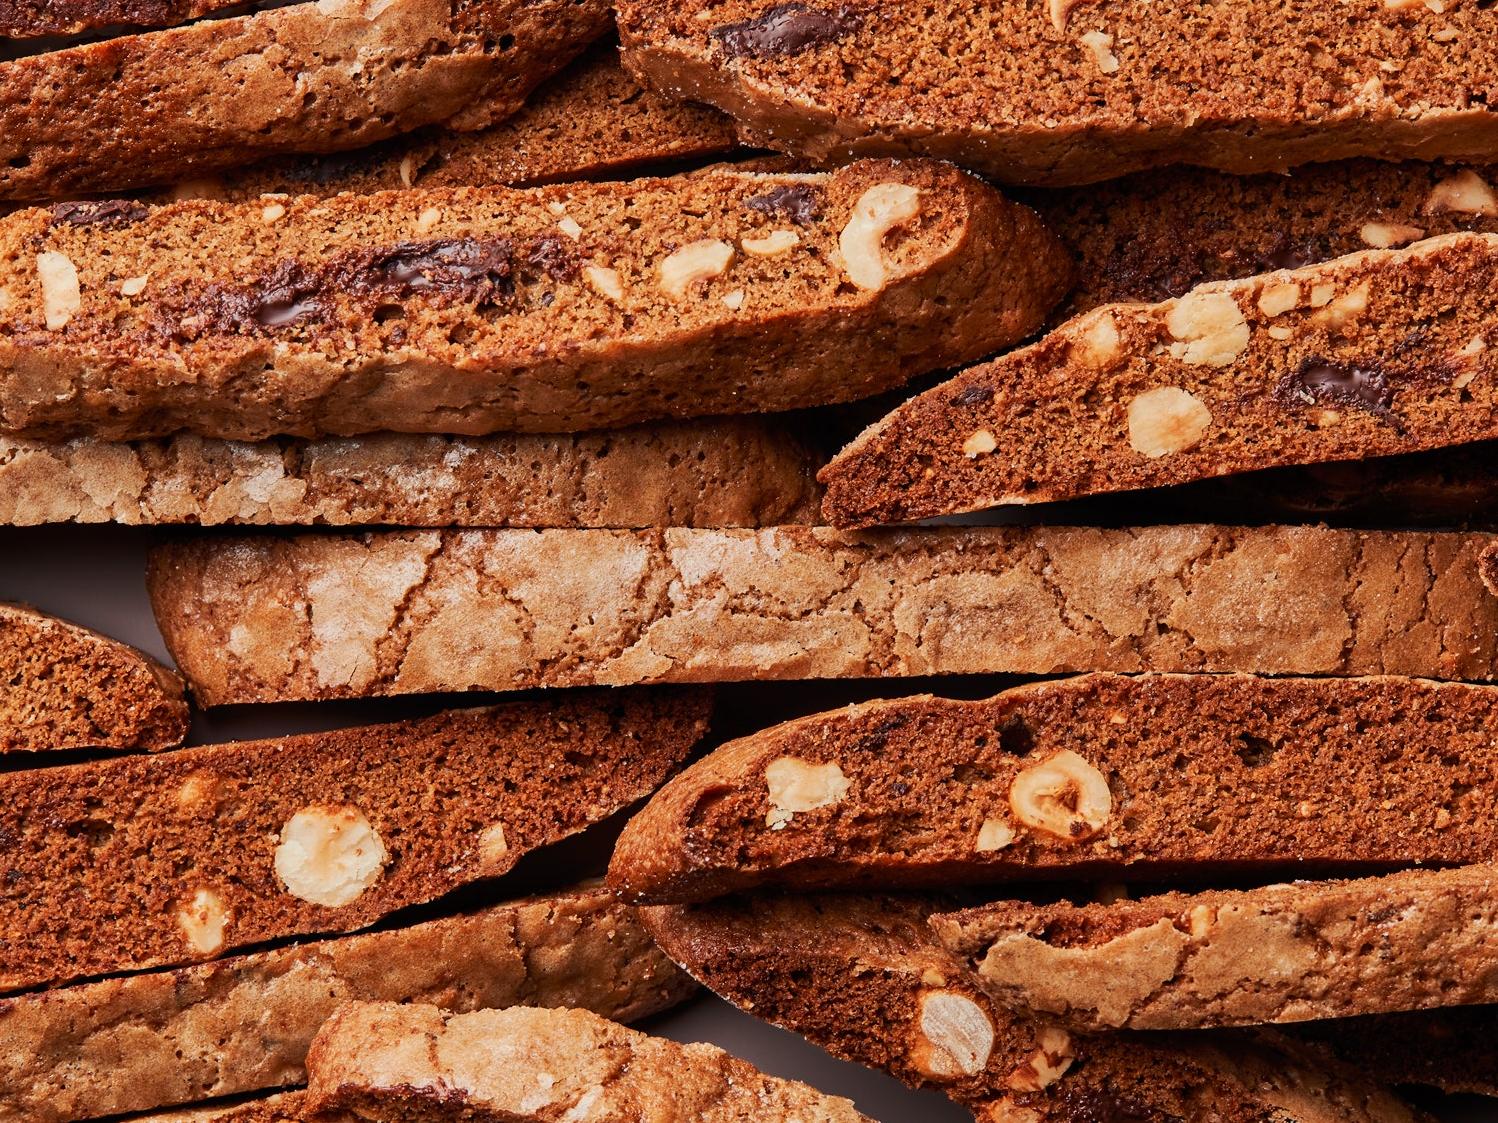  Start your day off with a sweet and nutty kick with our Coffee-Hazelnut Biscotti!